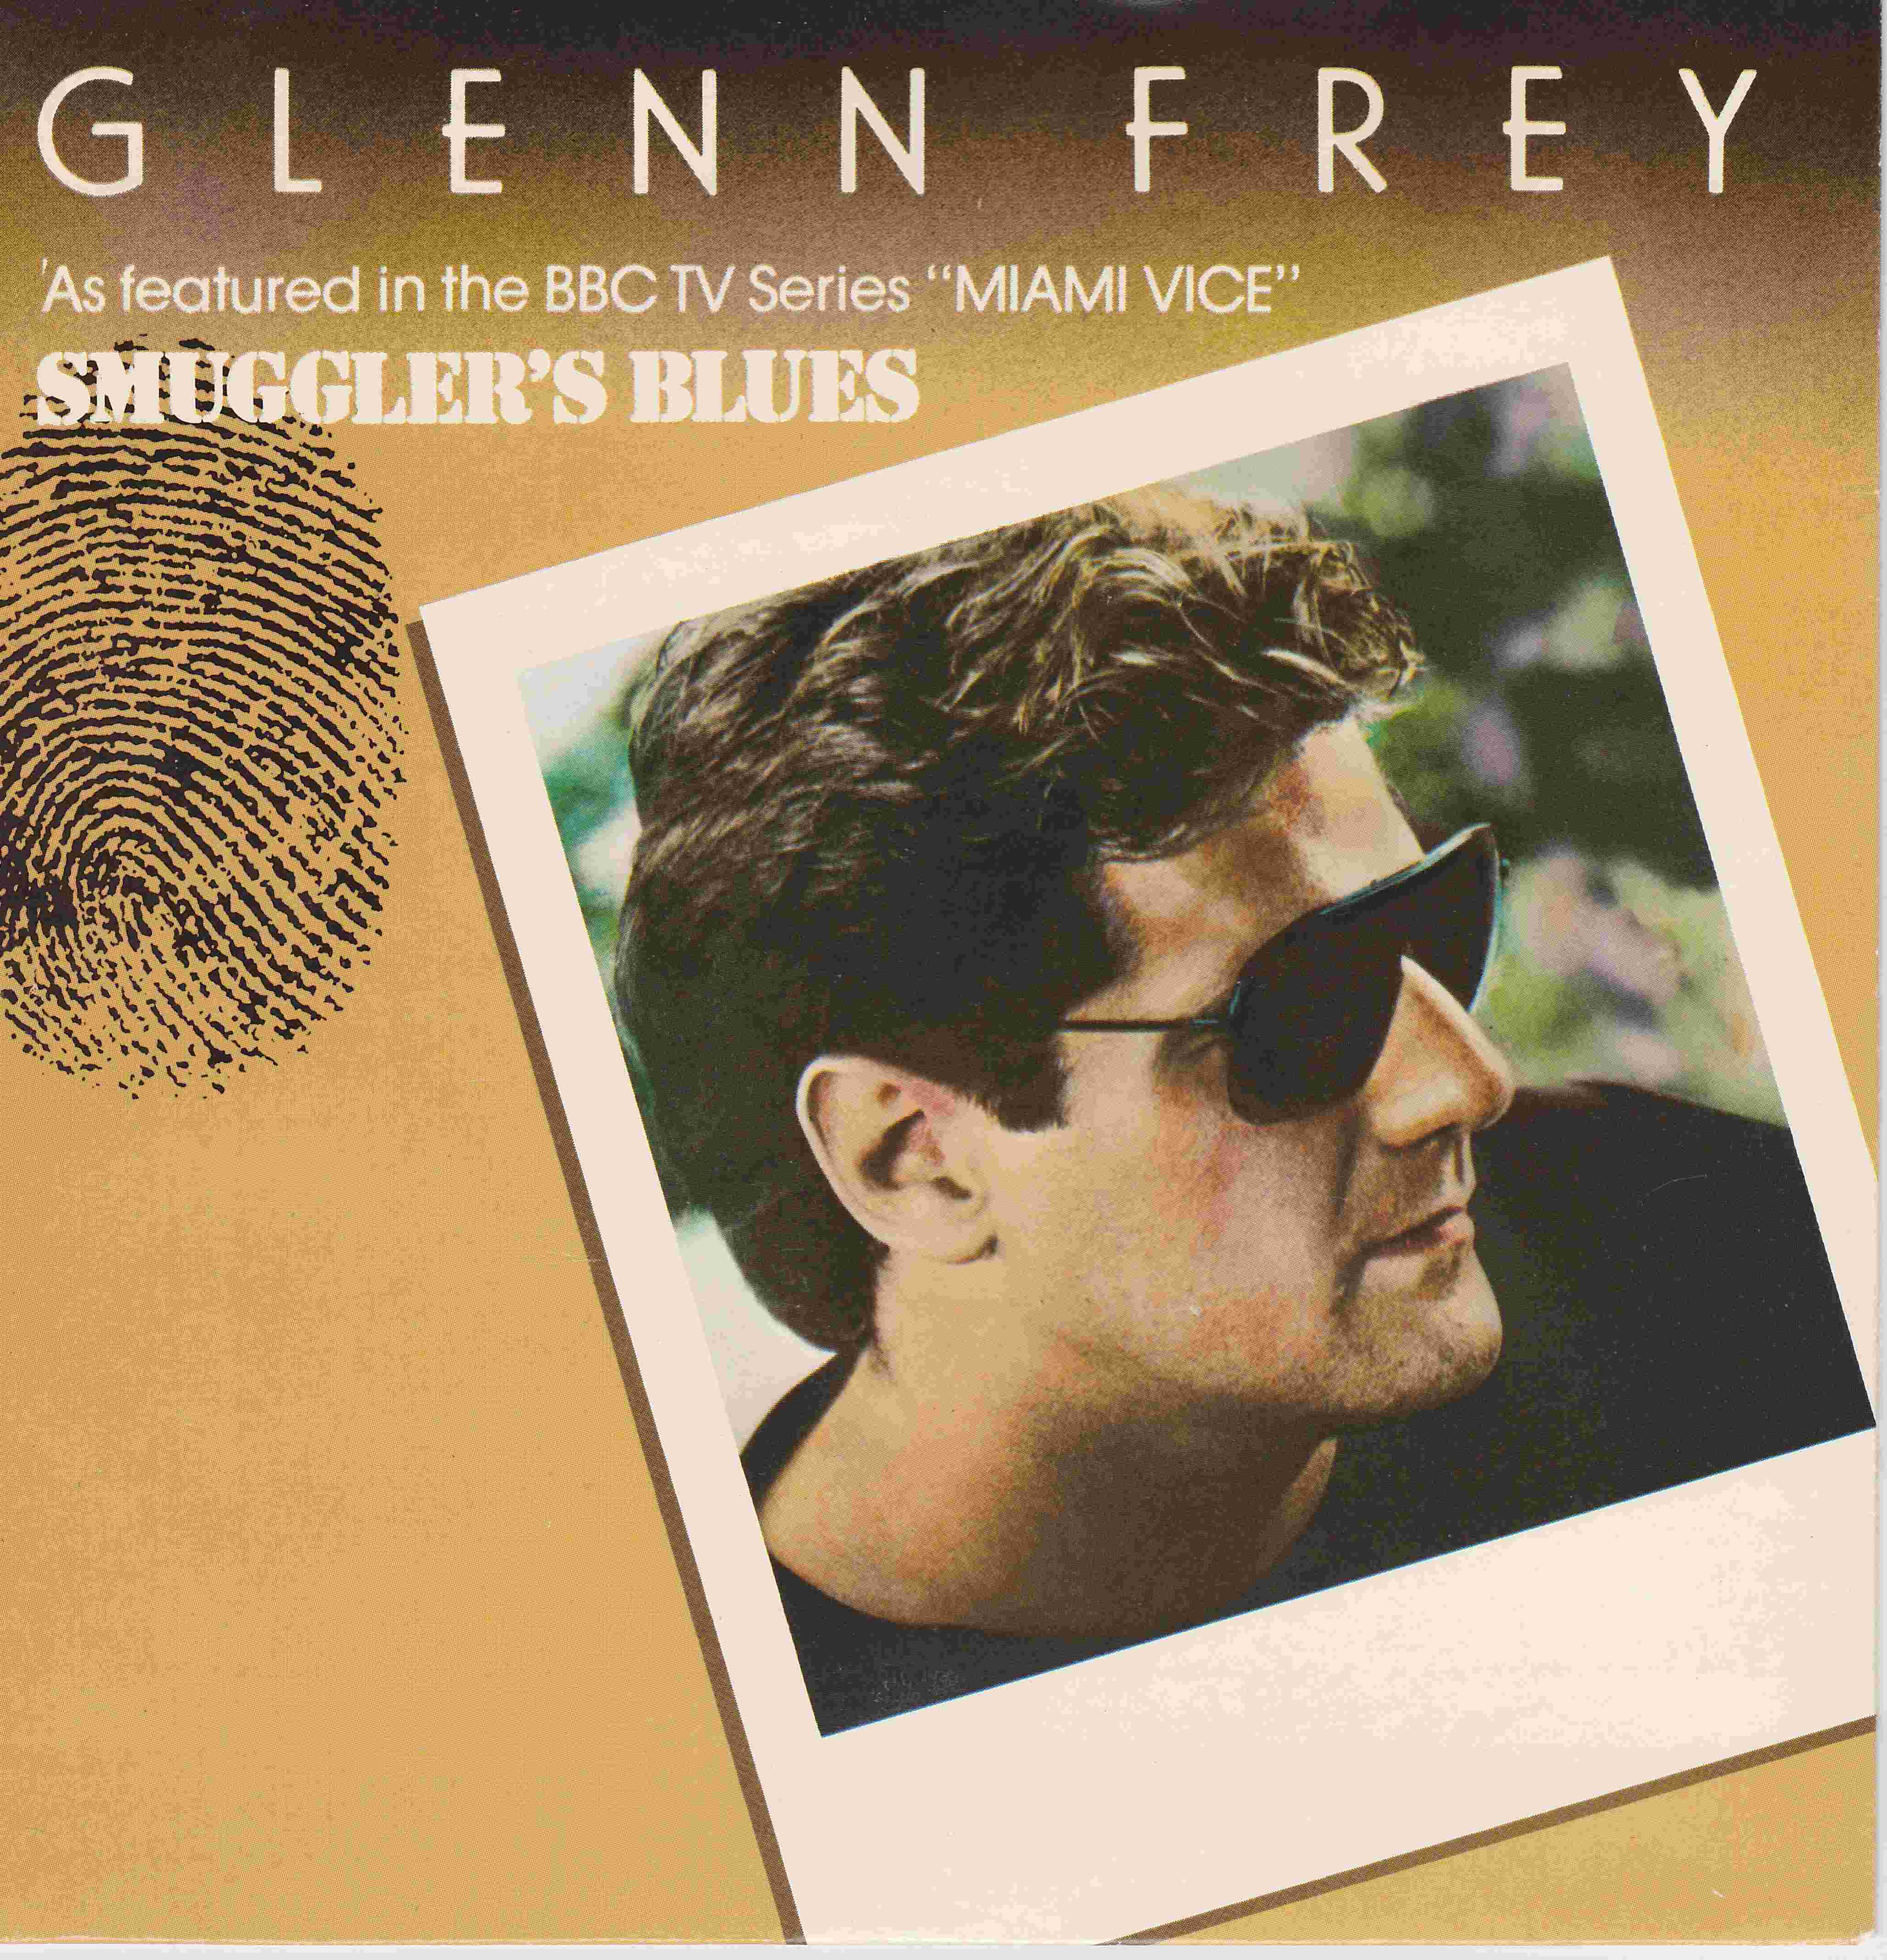 Picture of RESL 170 Smuggler's blues (Miami Vice) by artist Glenn Frey / Jack Tempchin from the BBC singles - Records and Tapes library